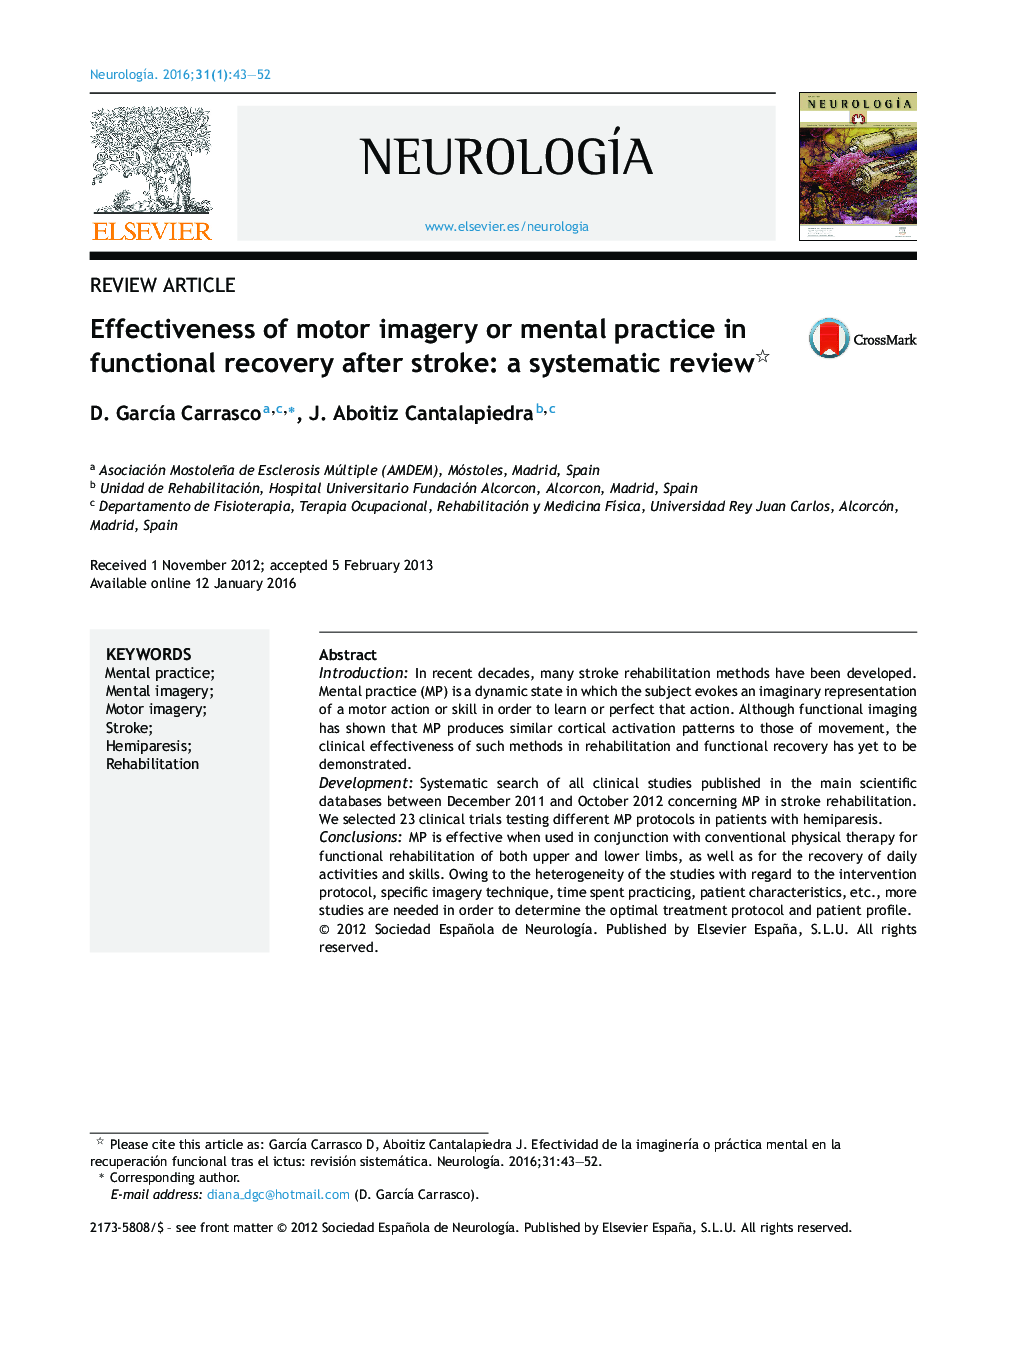 Effectiveness of motor imagery or mental practice in functional recovery after stroke: a systematic review 